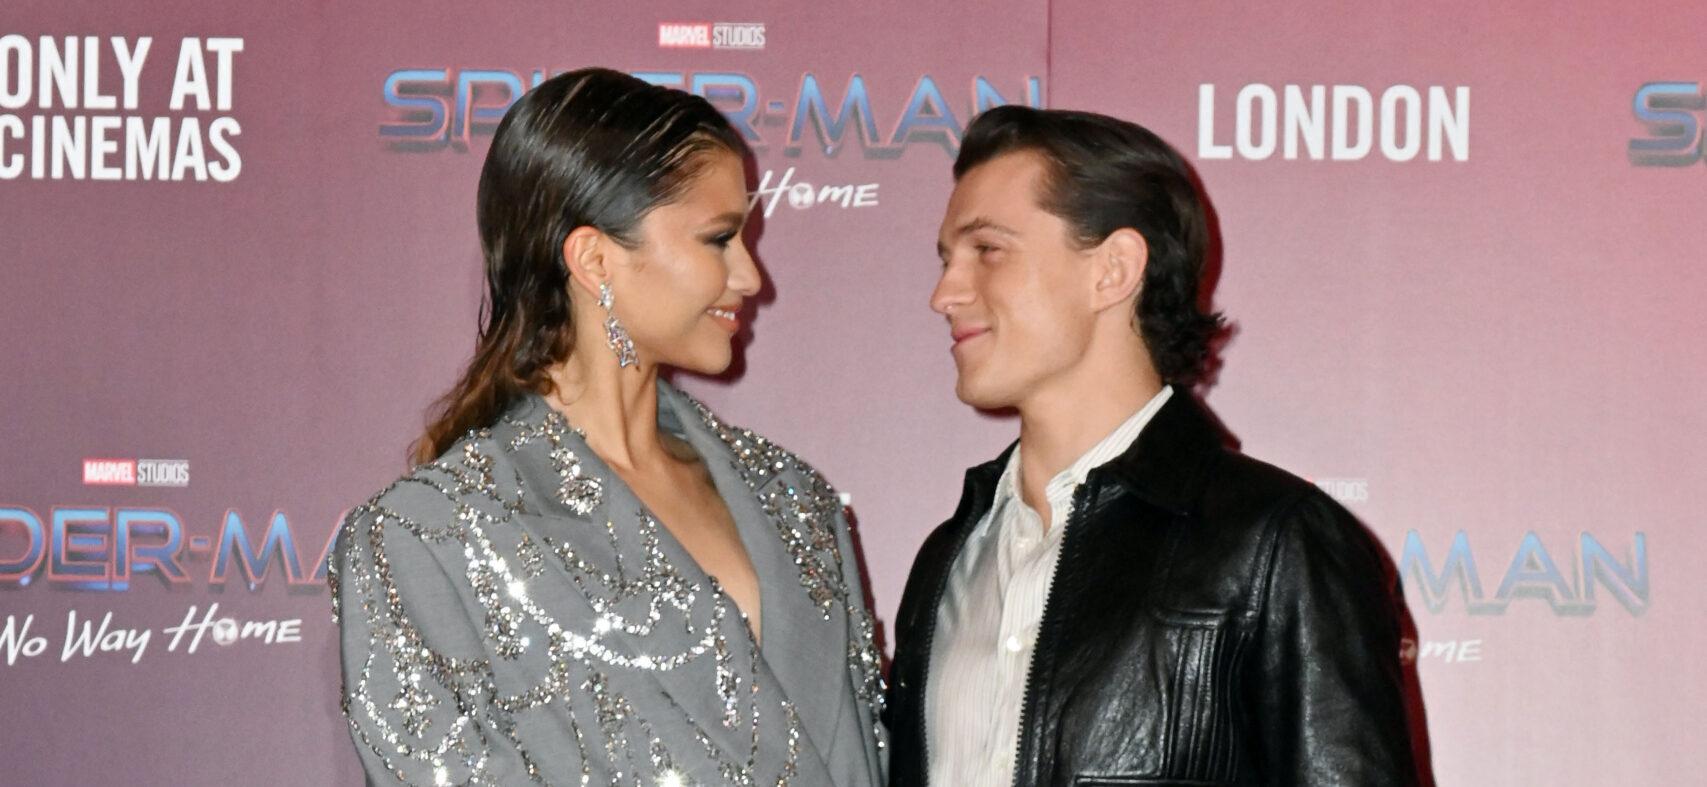 Zendaya Gets Candid About WHY She Keeps Romance With Tom Holland Private